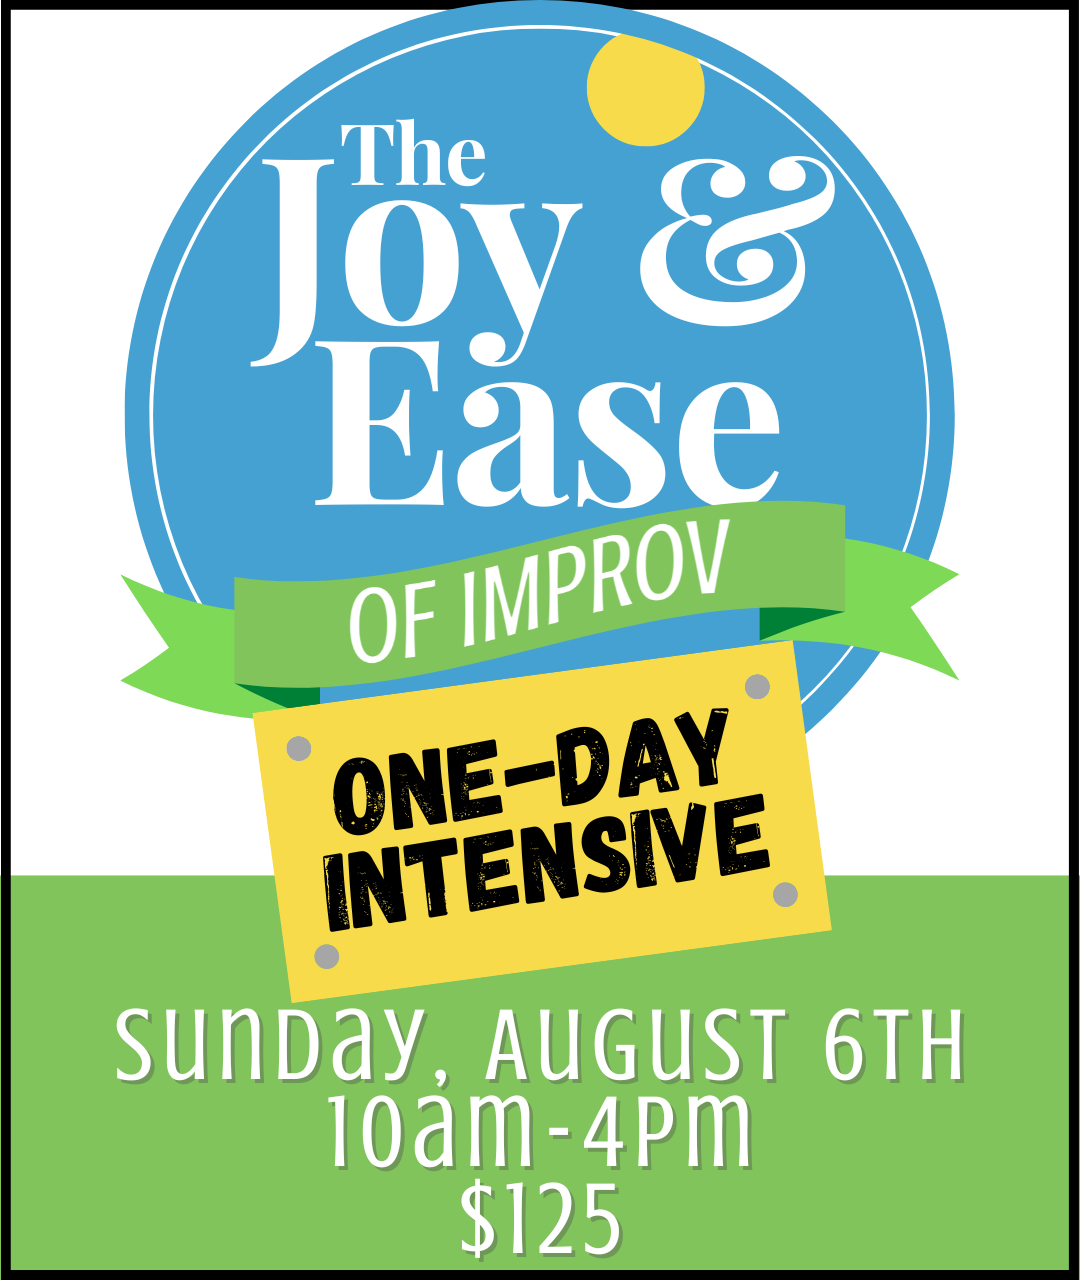 The Joy & Ease of Improv: One-Day Intensive